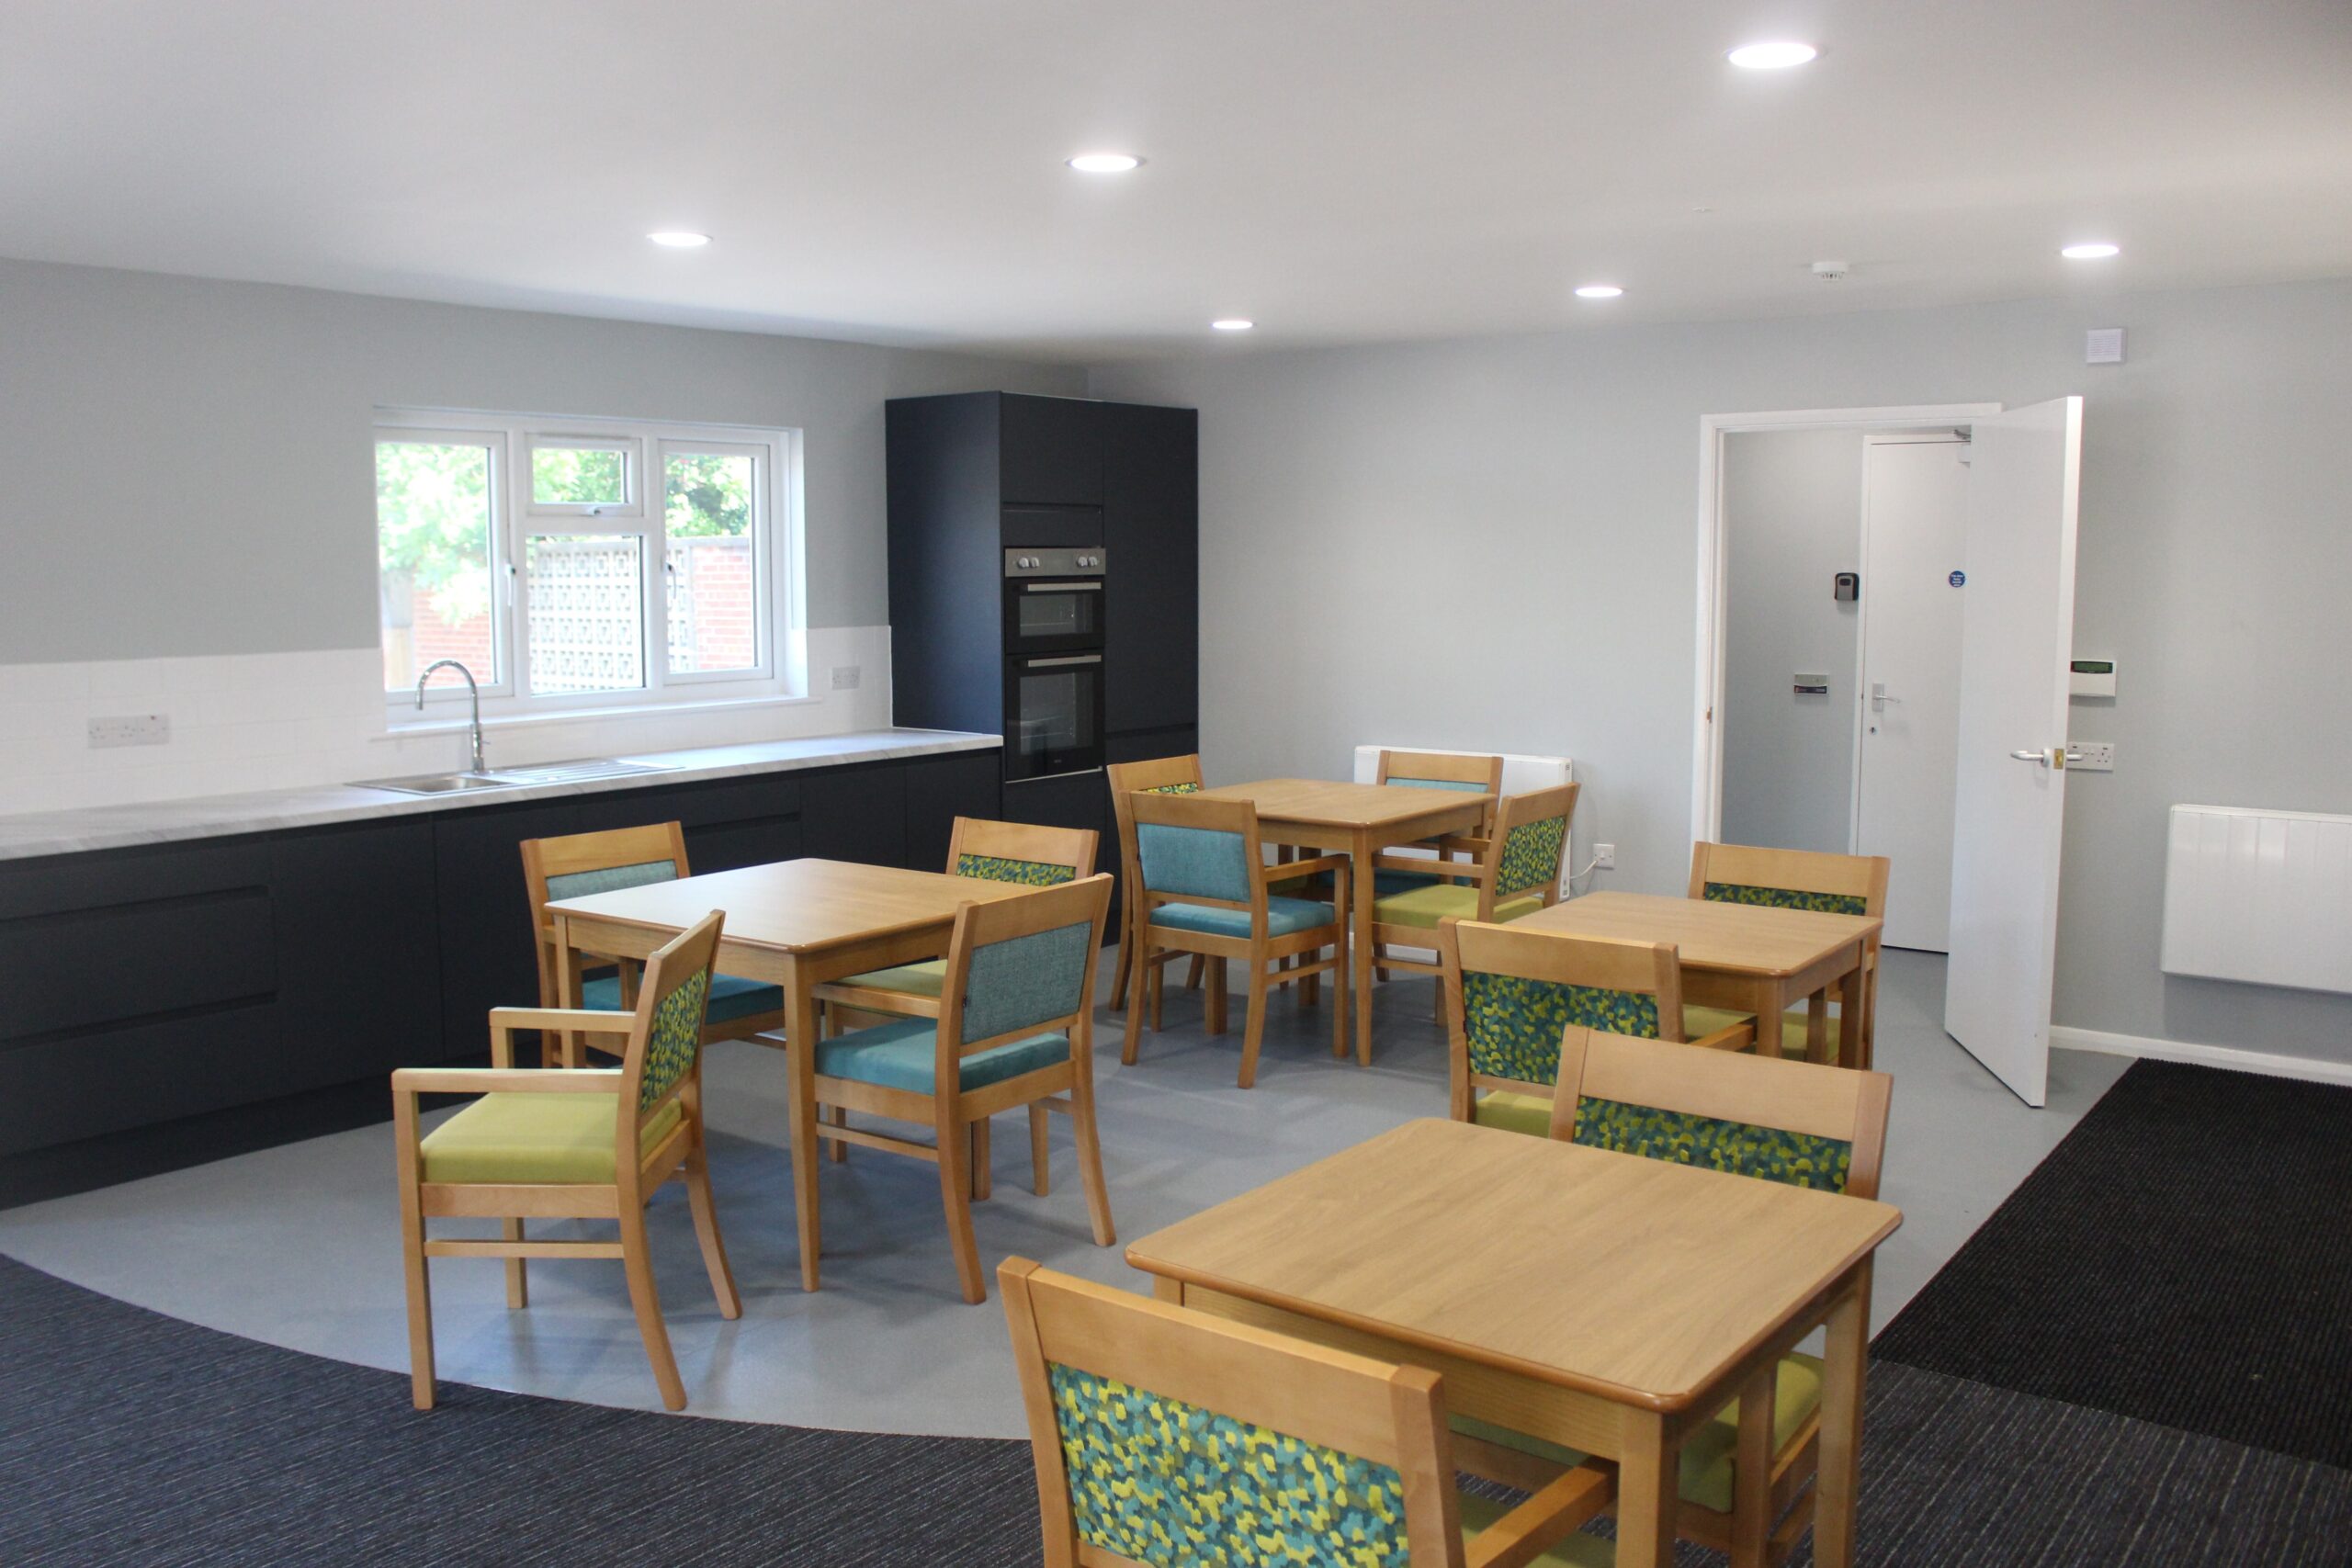 Picture of the new West Bow House Communal Room